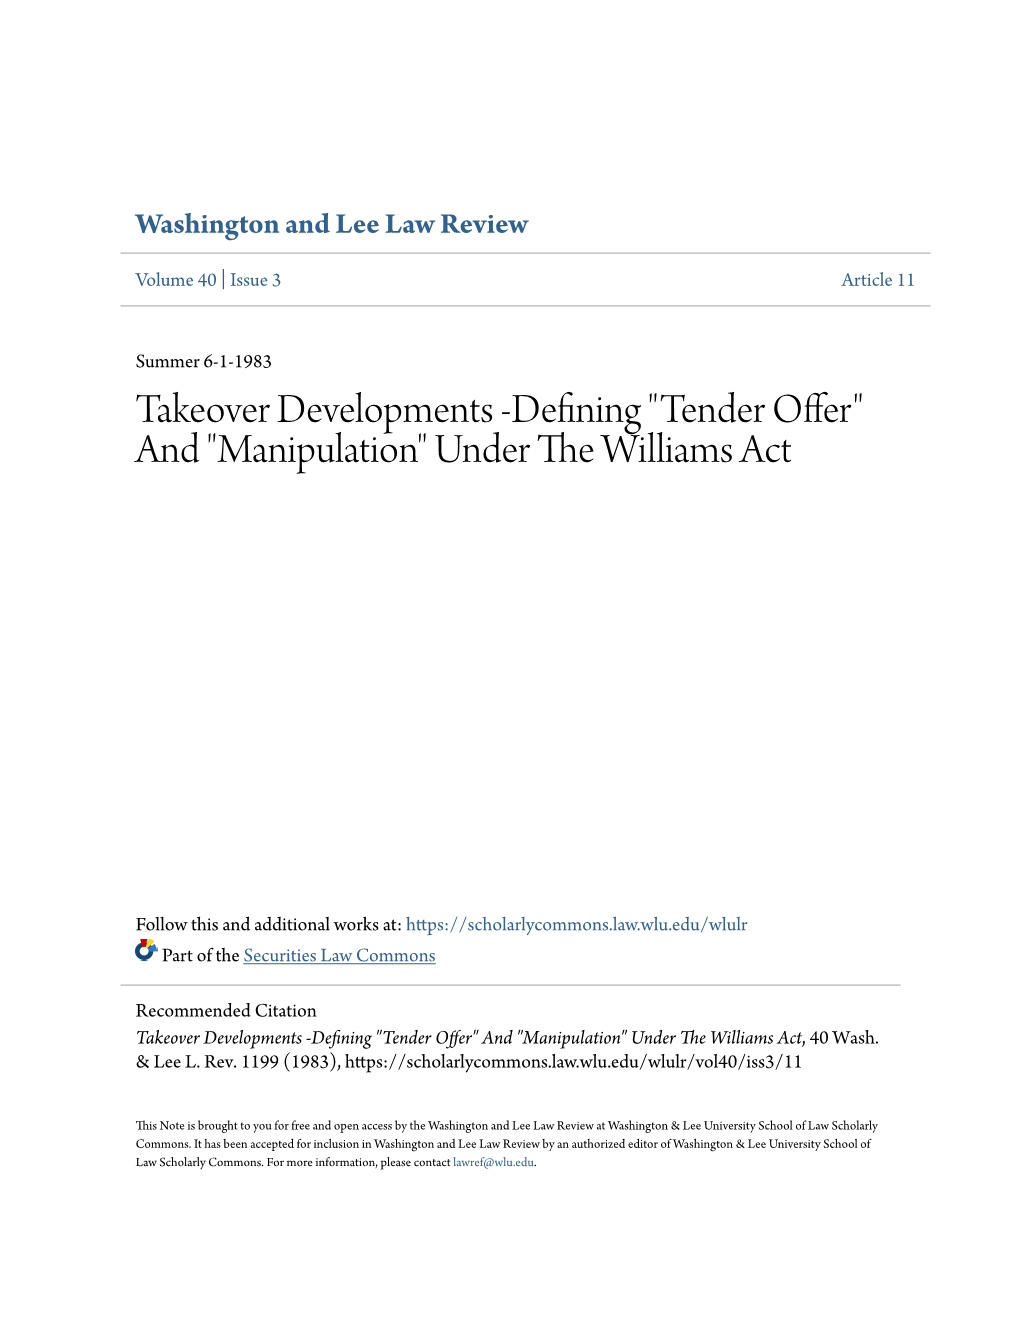 "Tender Offer" and "Manipulation" Under the Iw Lliams Act